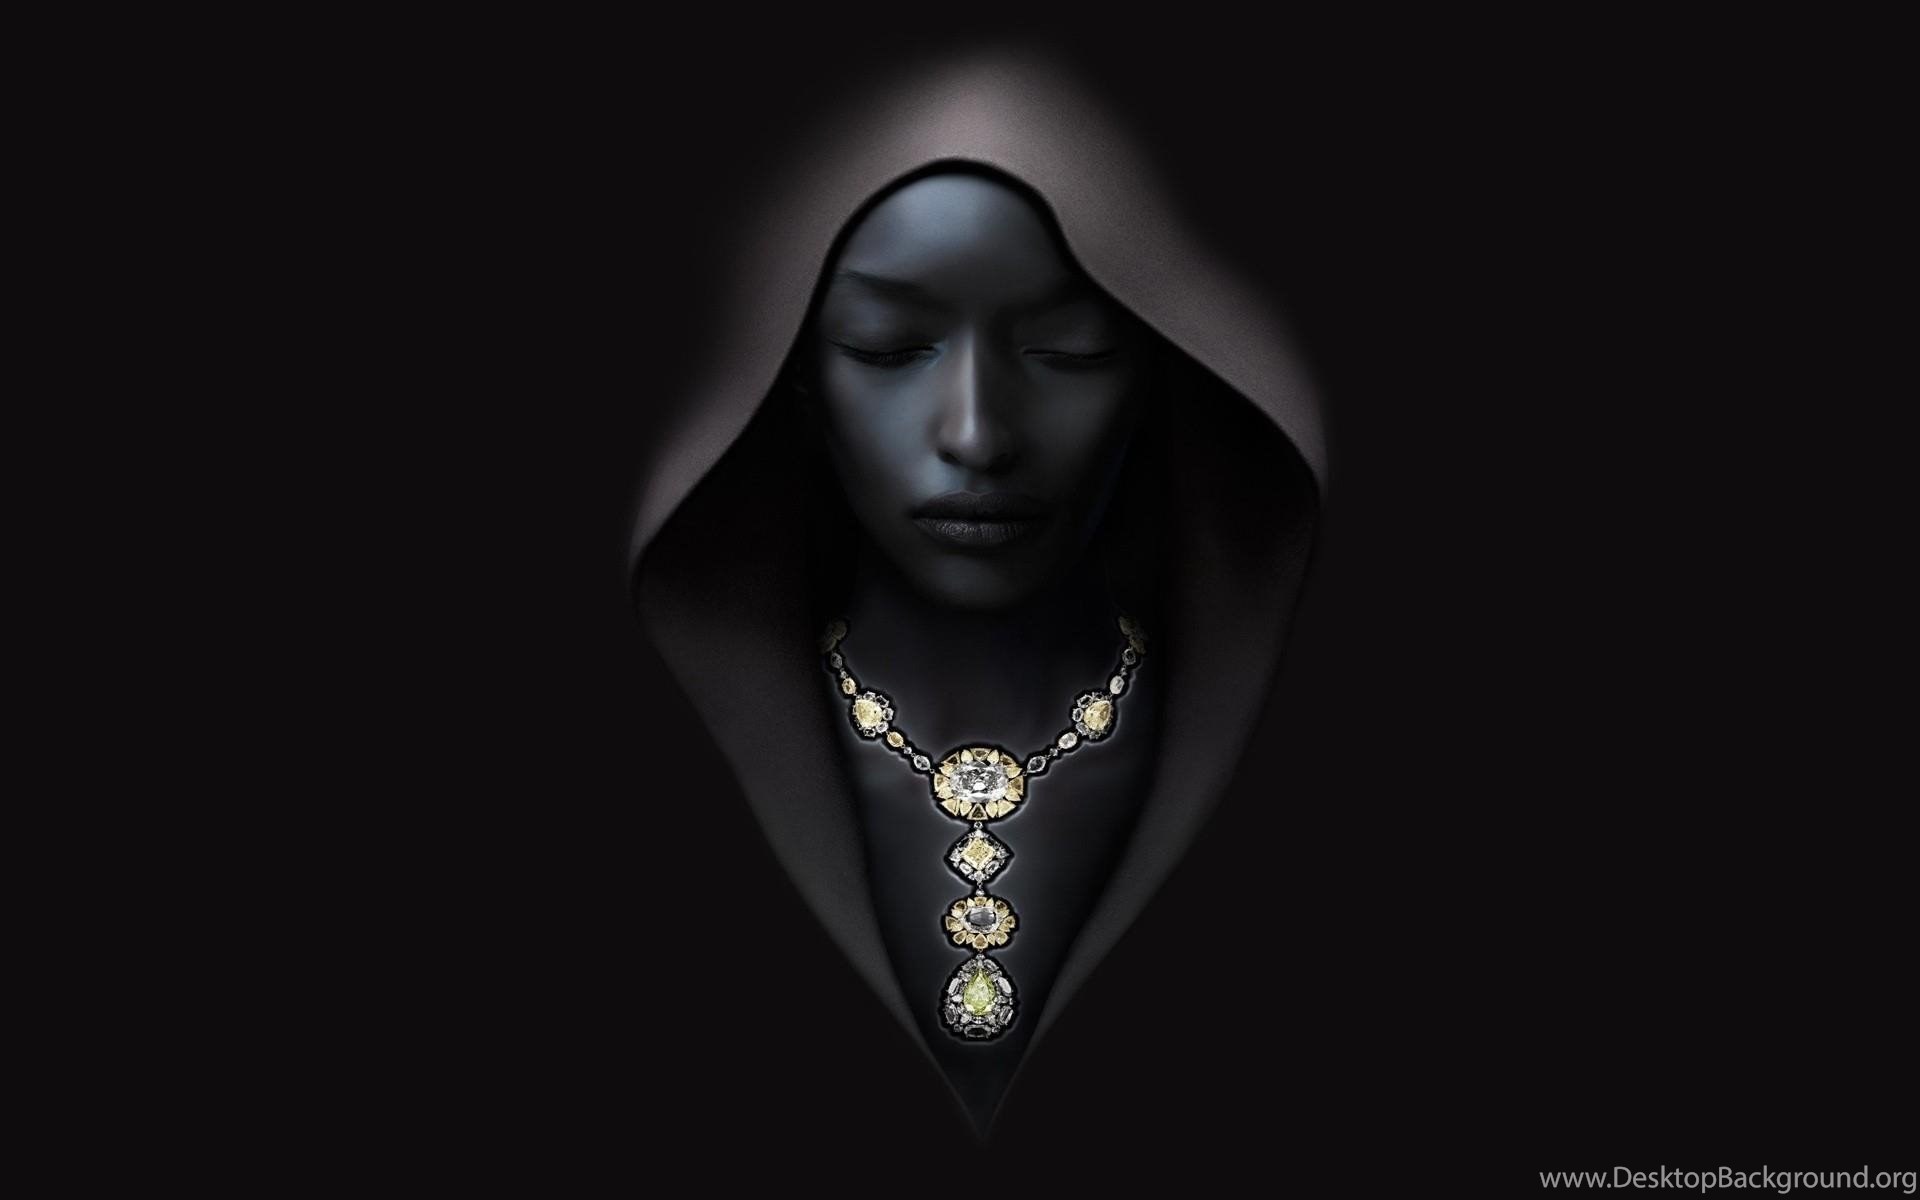 A Girl In A Hood On A Black Background Wallpaper And Image. Desktop Background